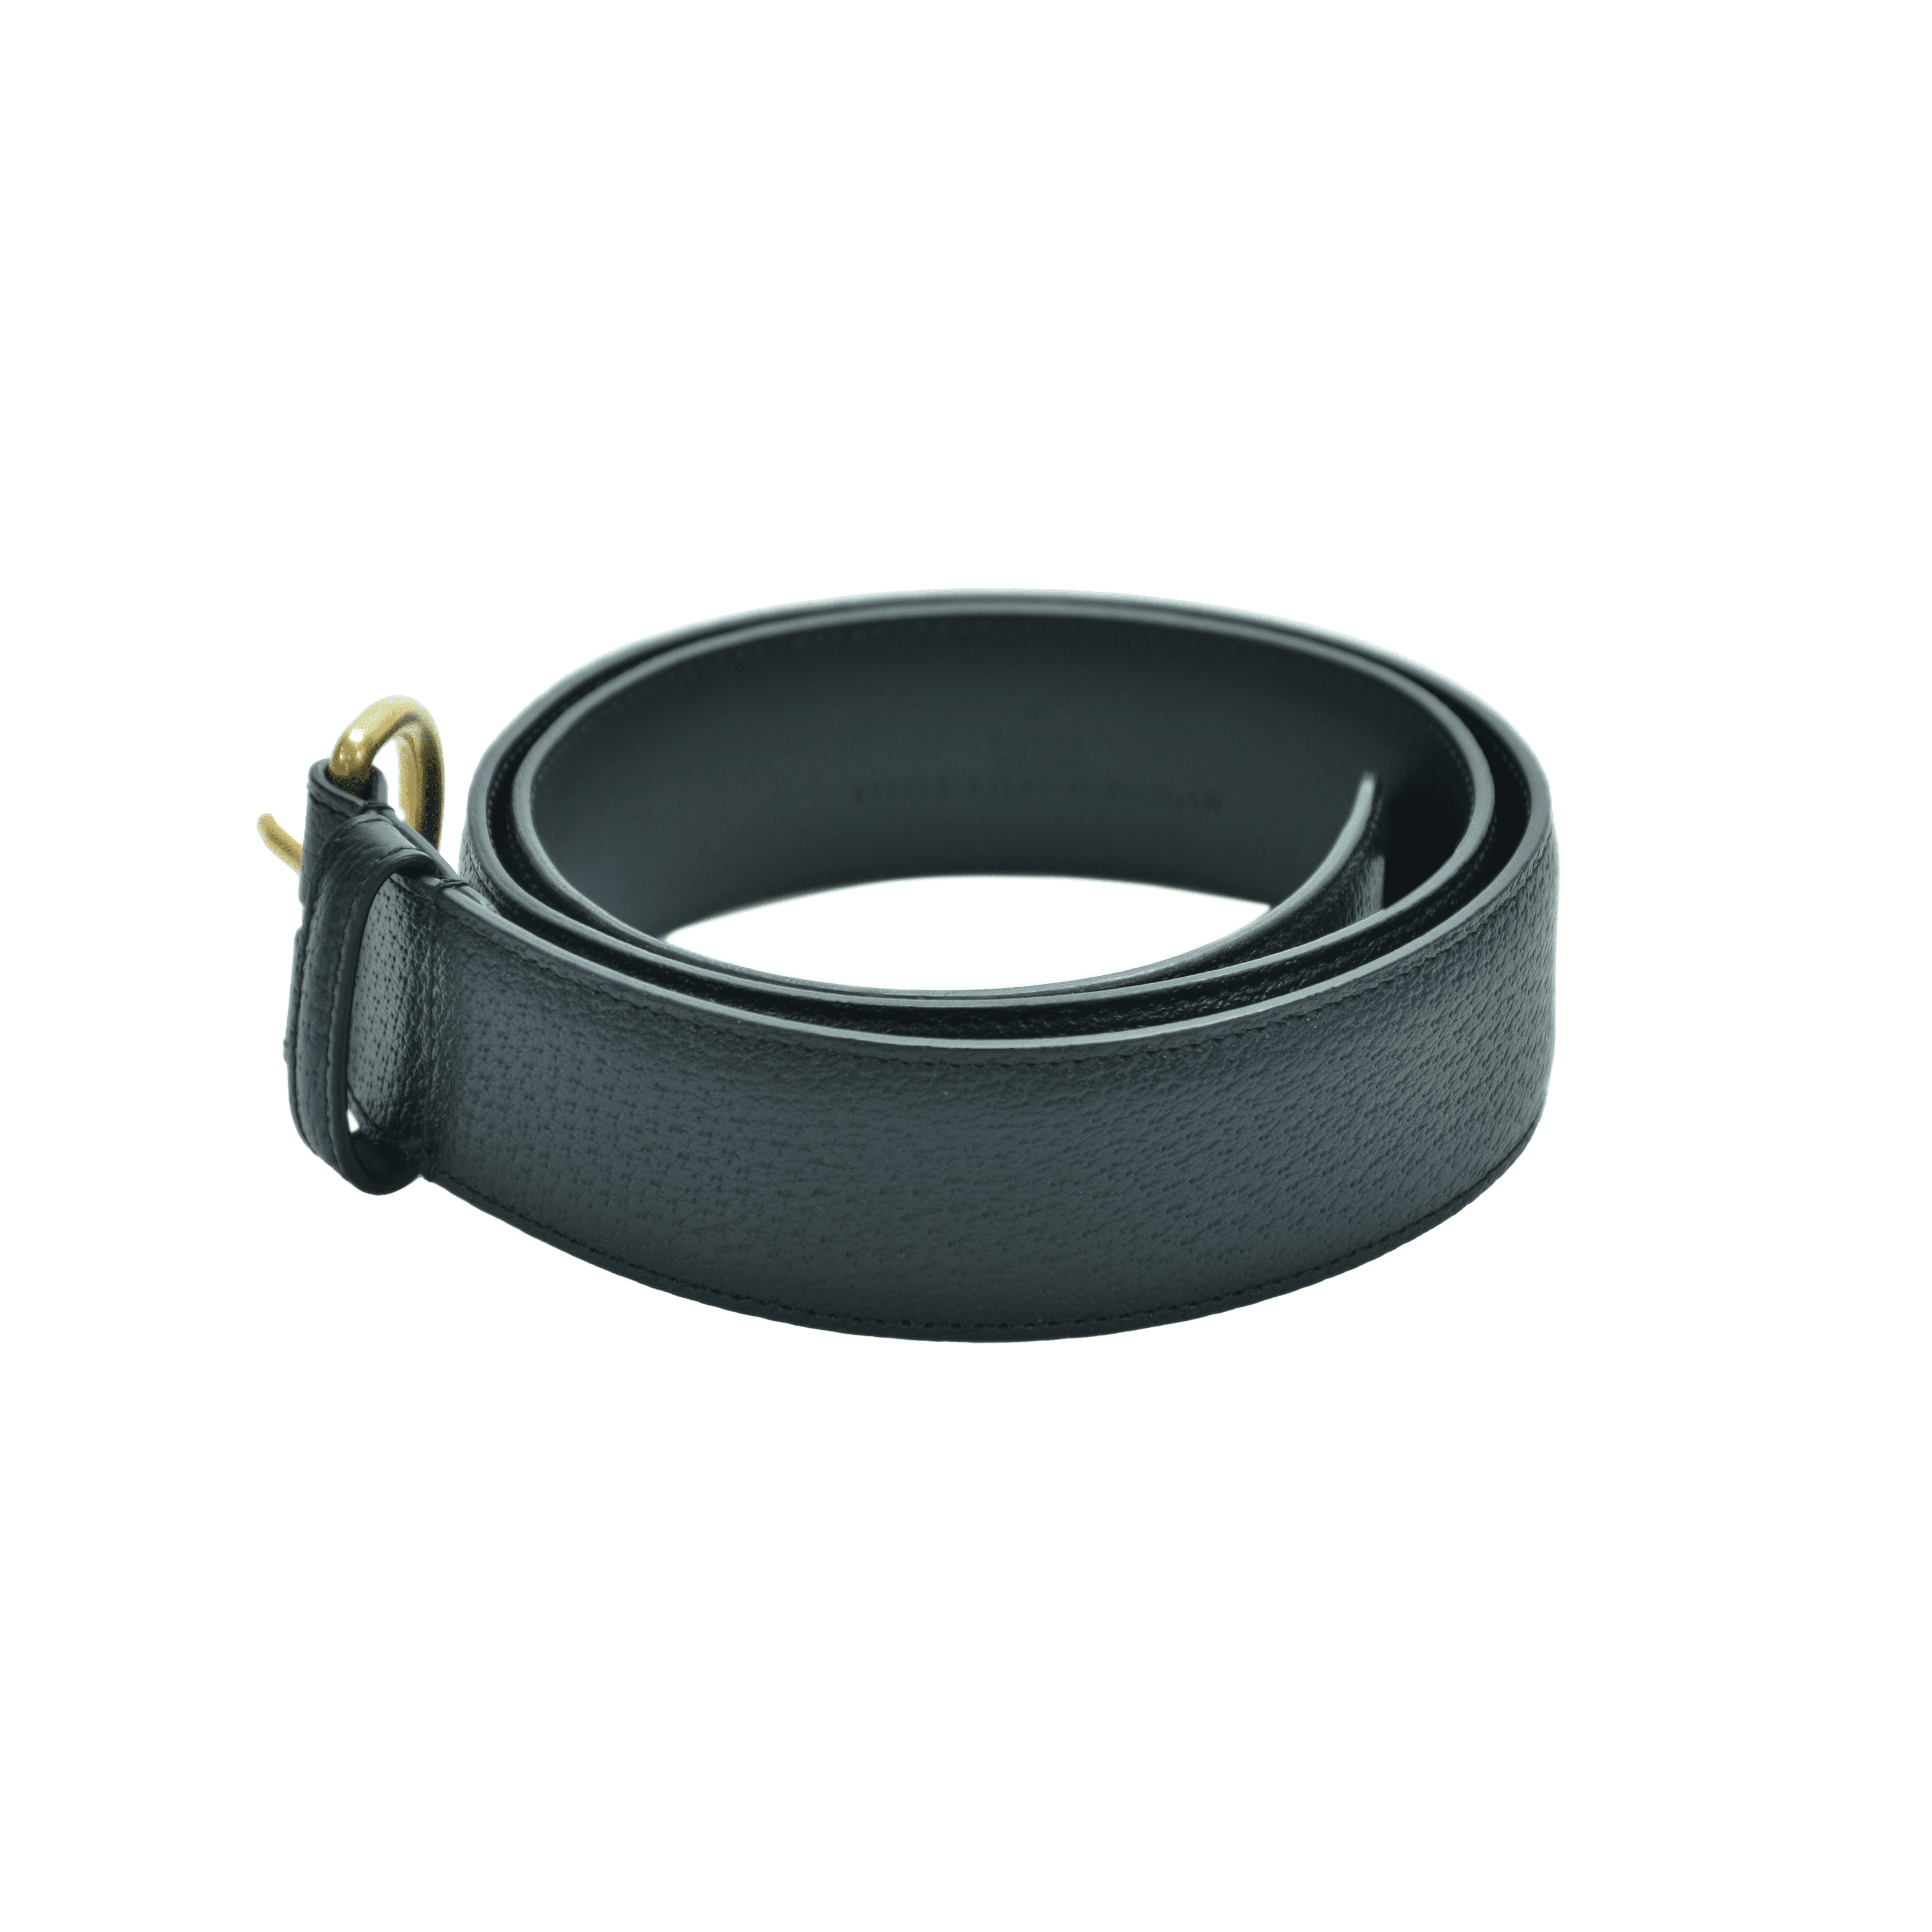 Burberry Black Leather Belt With Gold Buckle